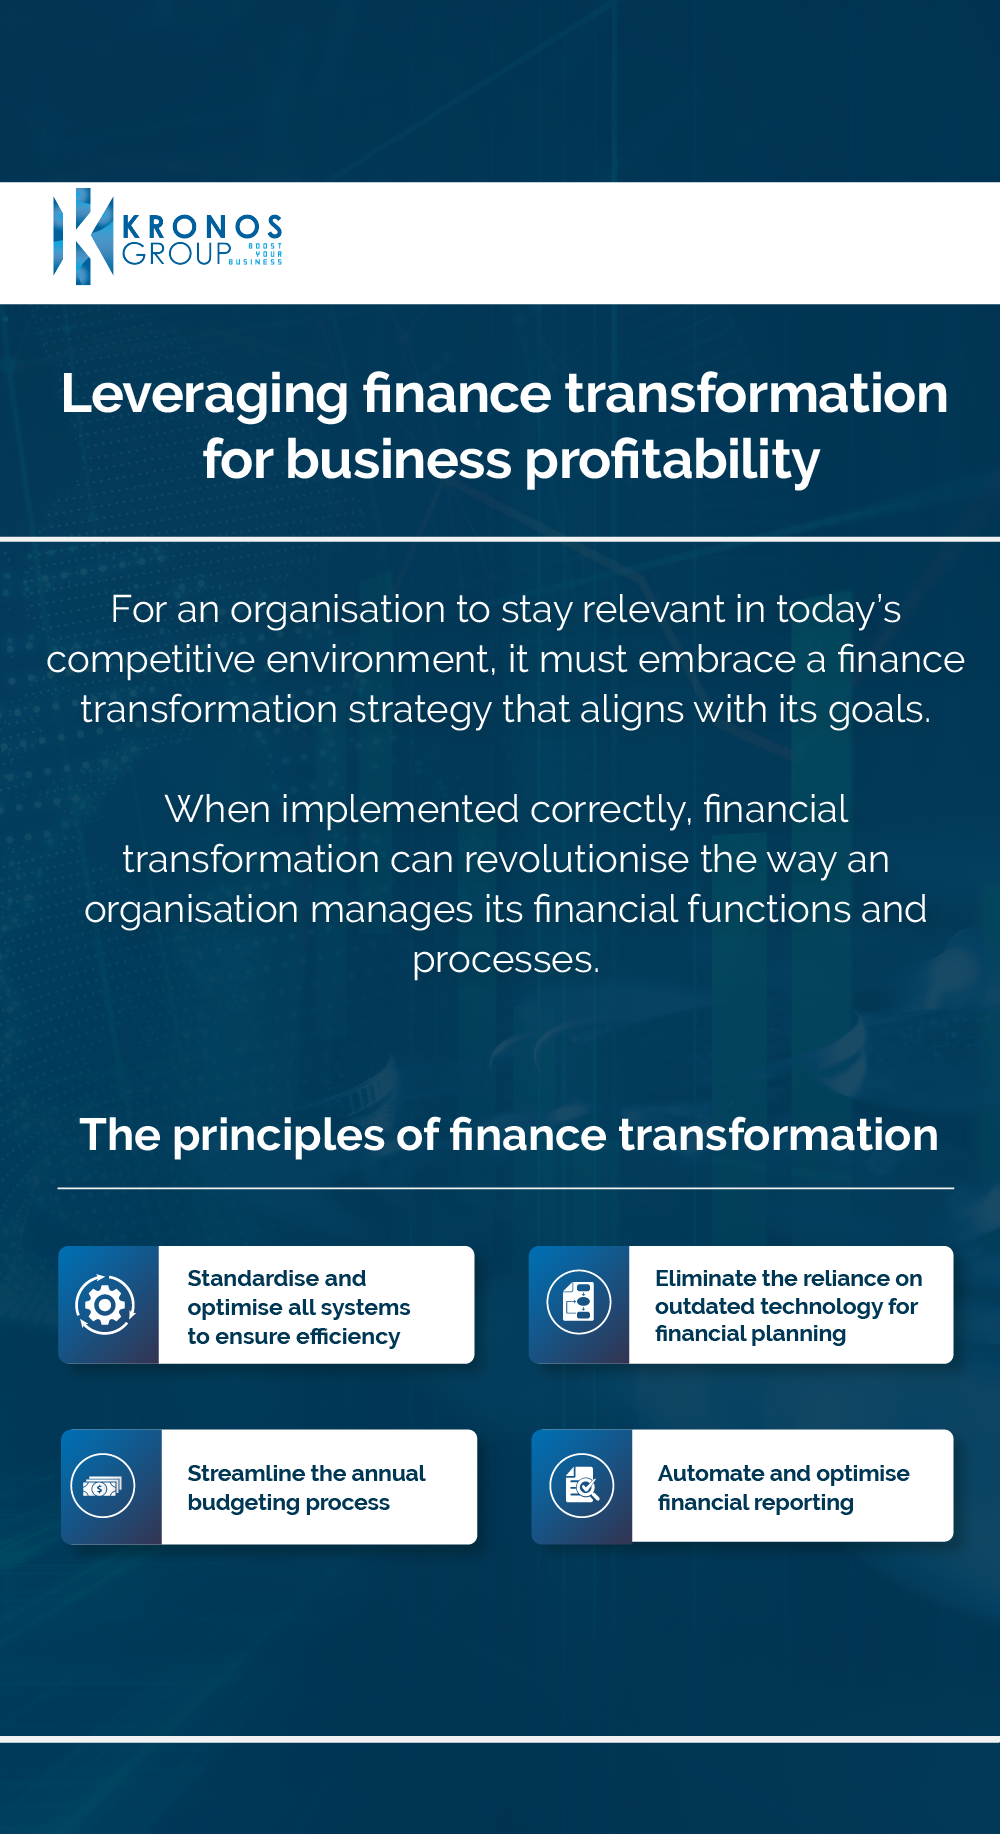 Leveraging finance transformation for business profitability